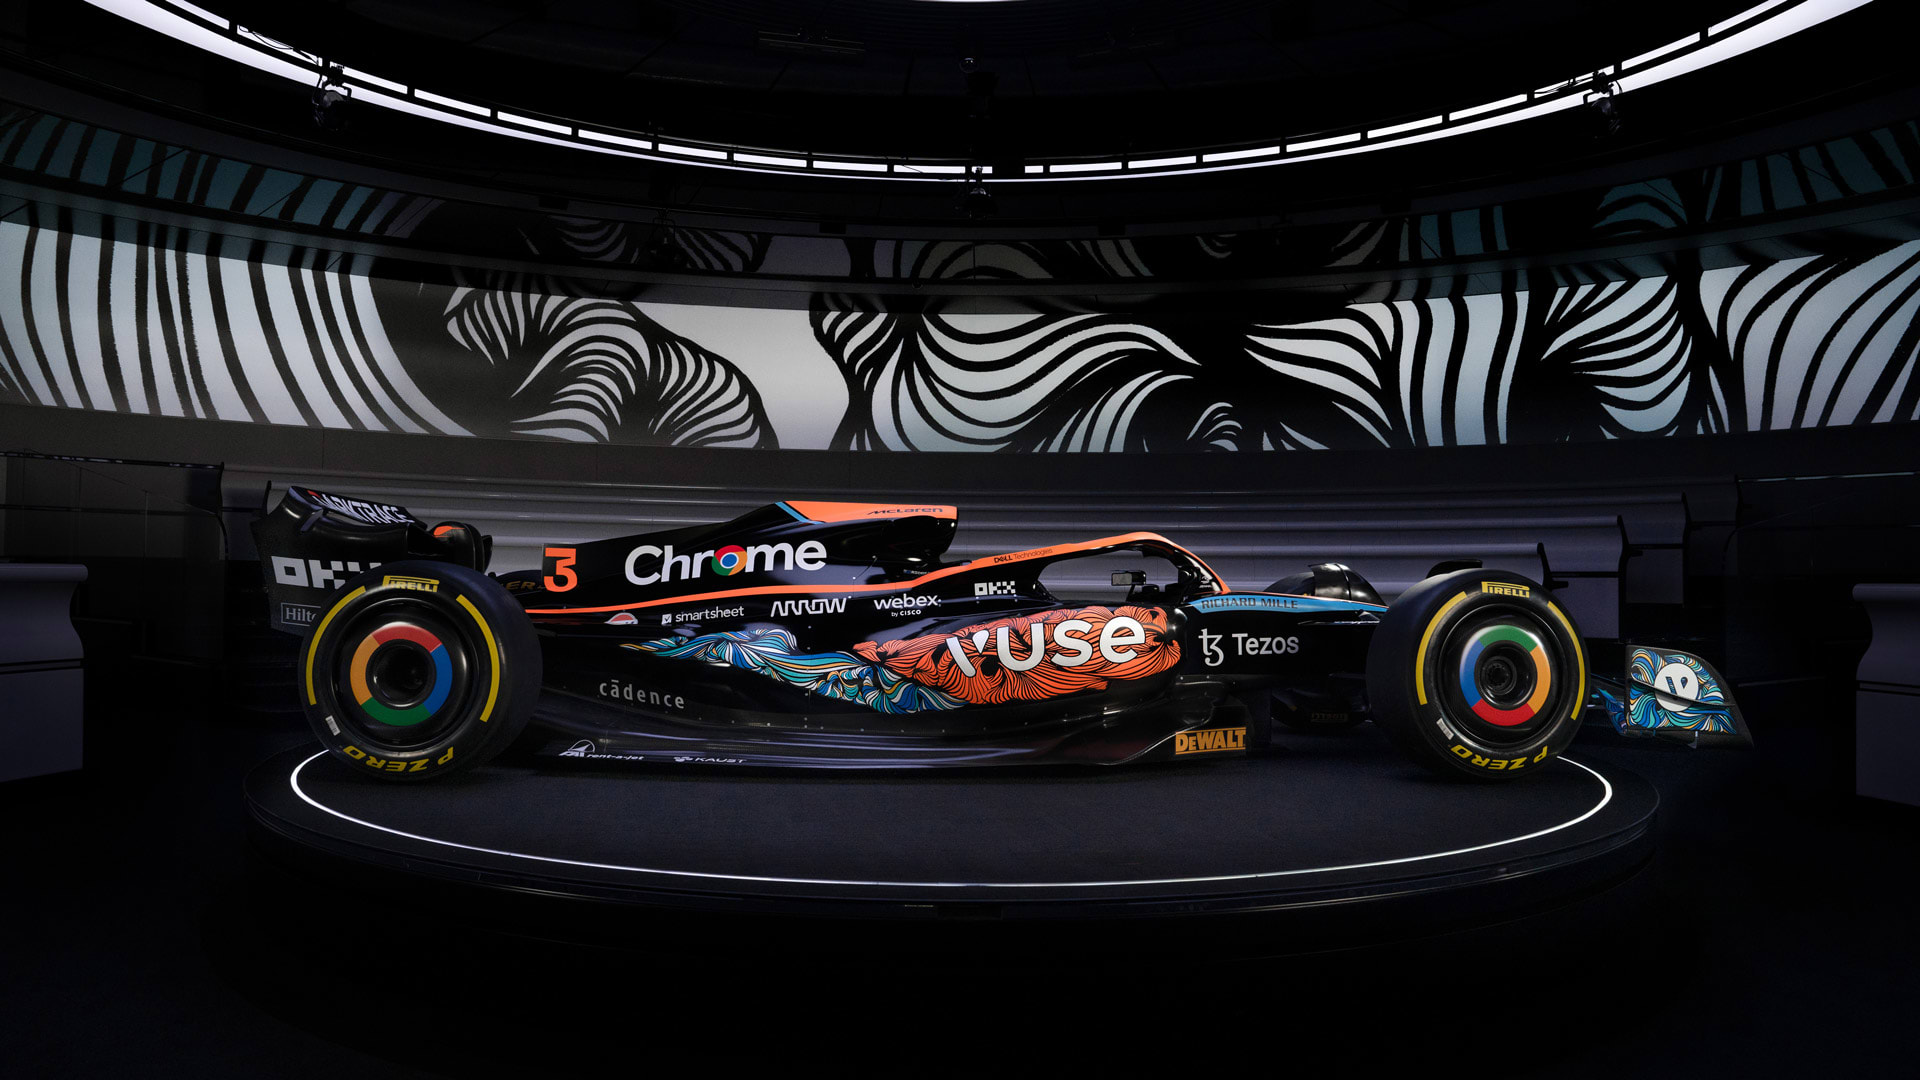 McLaren unveil particular livery for 2022 season finale in Abu Dhabi